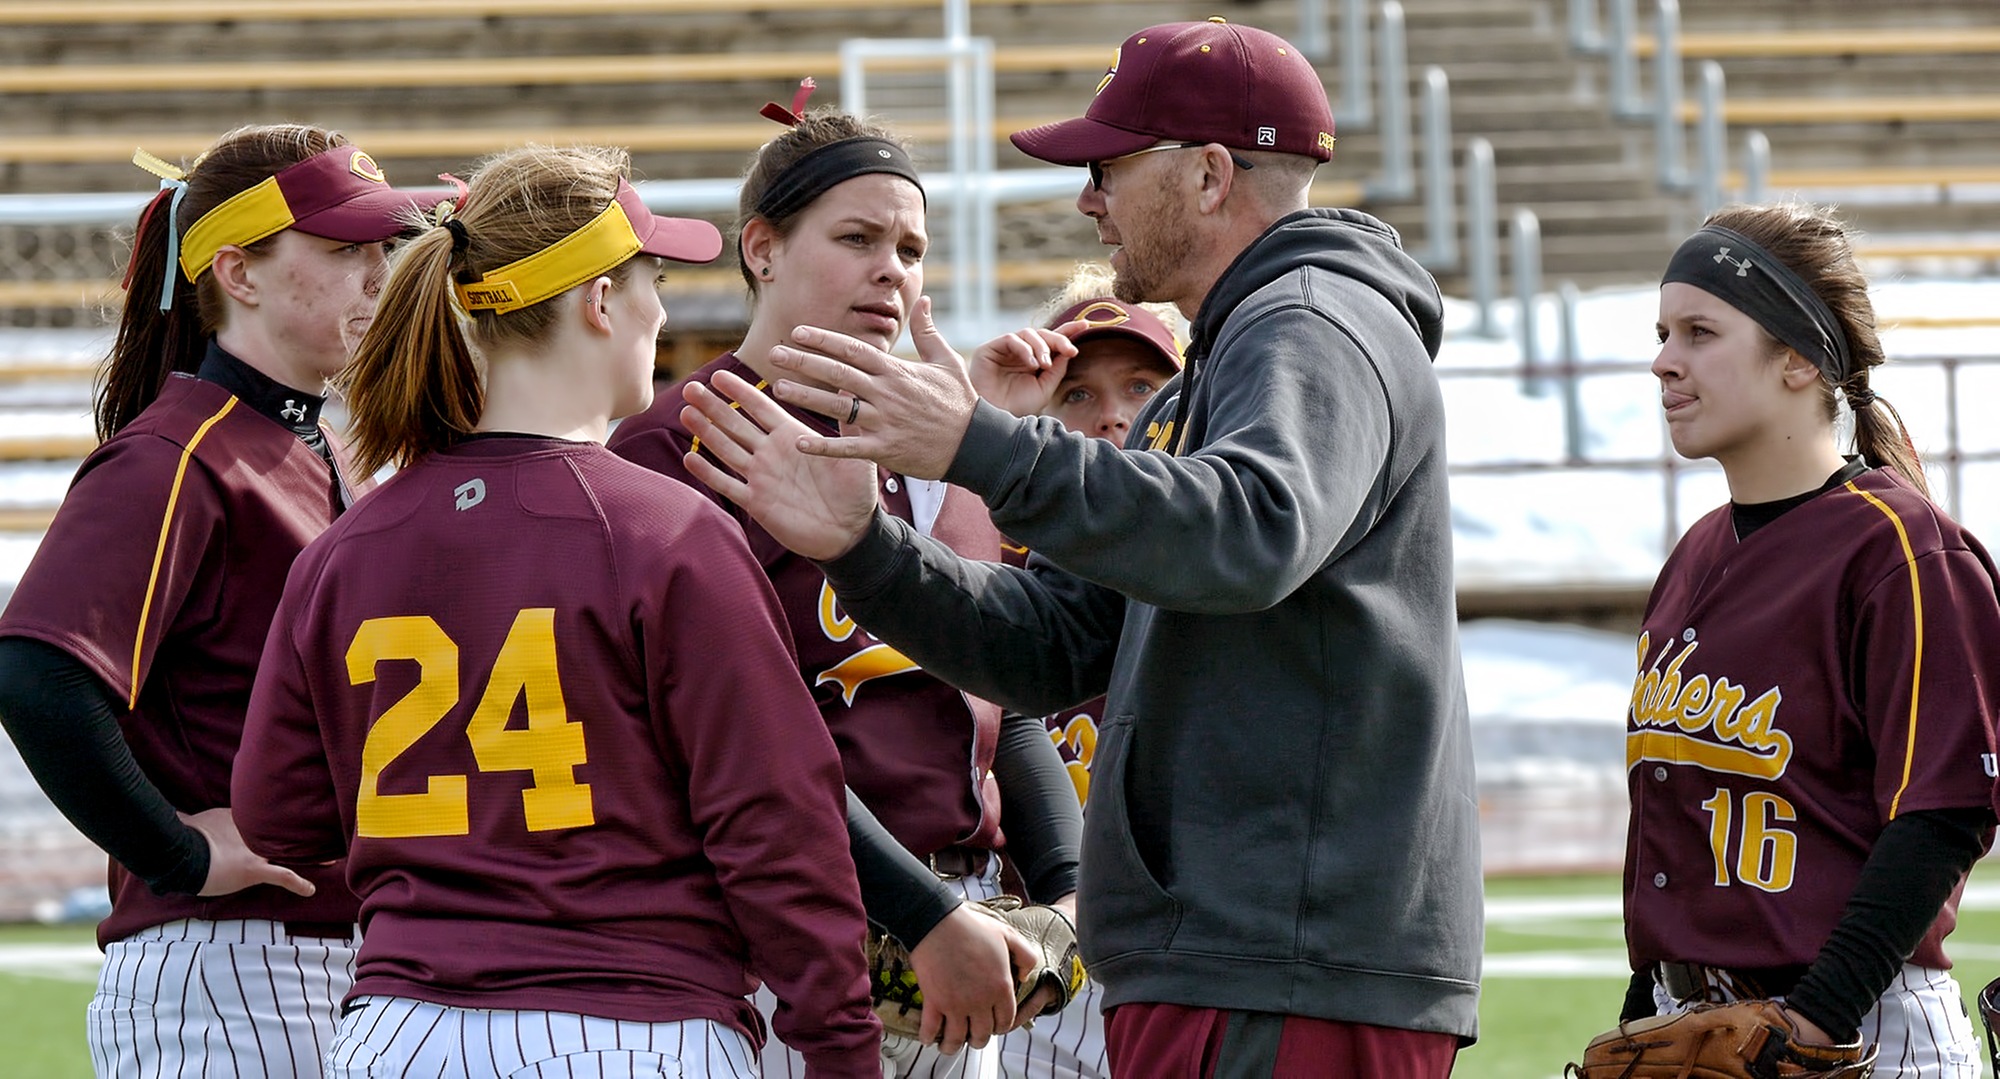 Concordia head coach Chad Slyter will hold the annual 1-day fastpitch camp on Mar. 17.